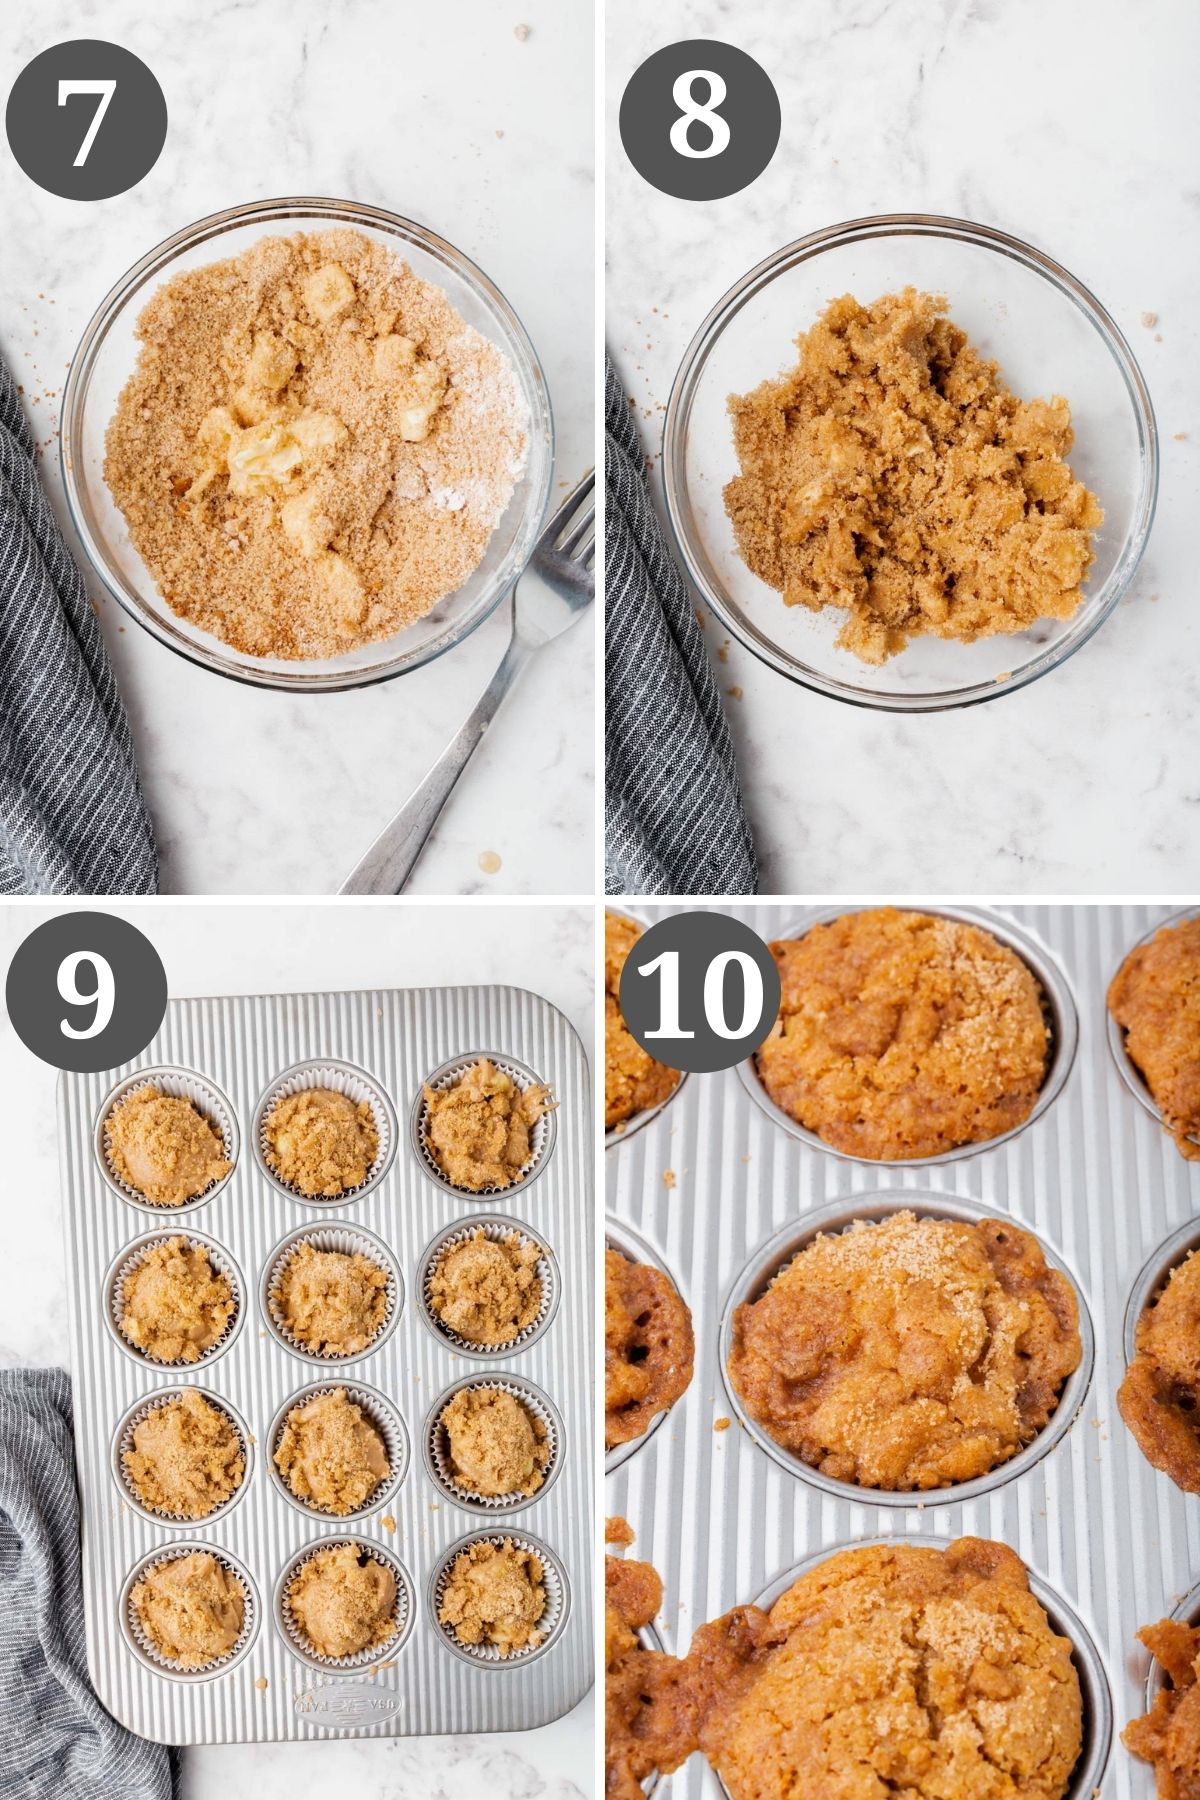 A collage showing how to make cinnamon streusel for placing on top of baked apple muffins.